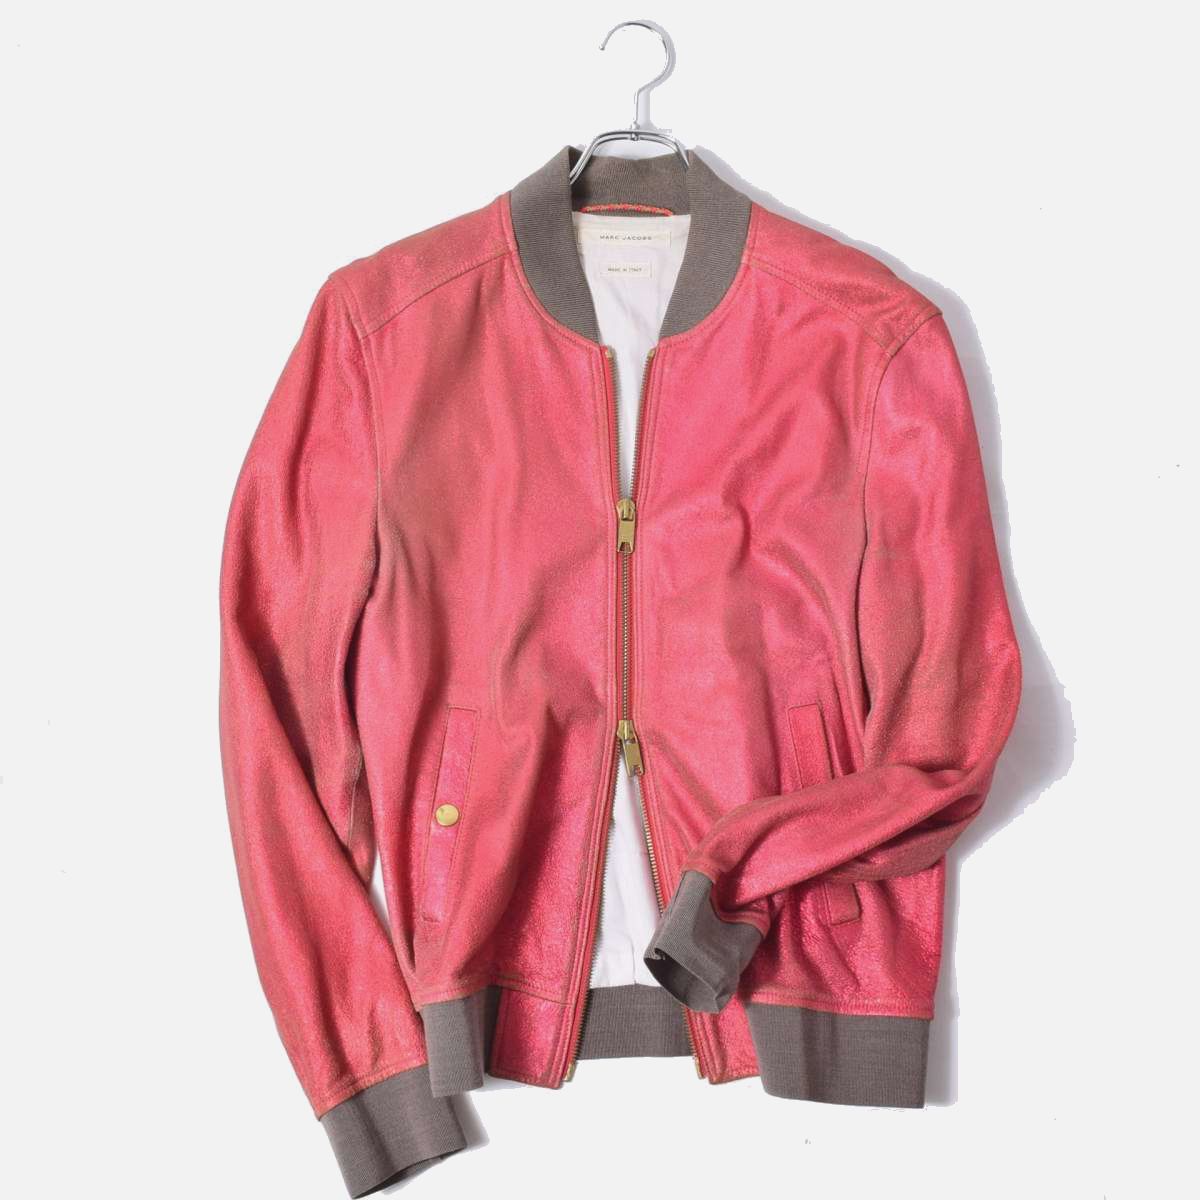 ALL LAME NEON PINK JACKET